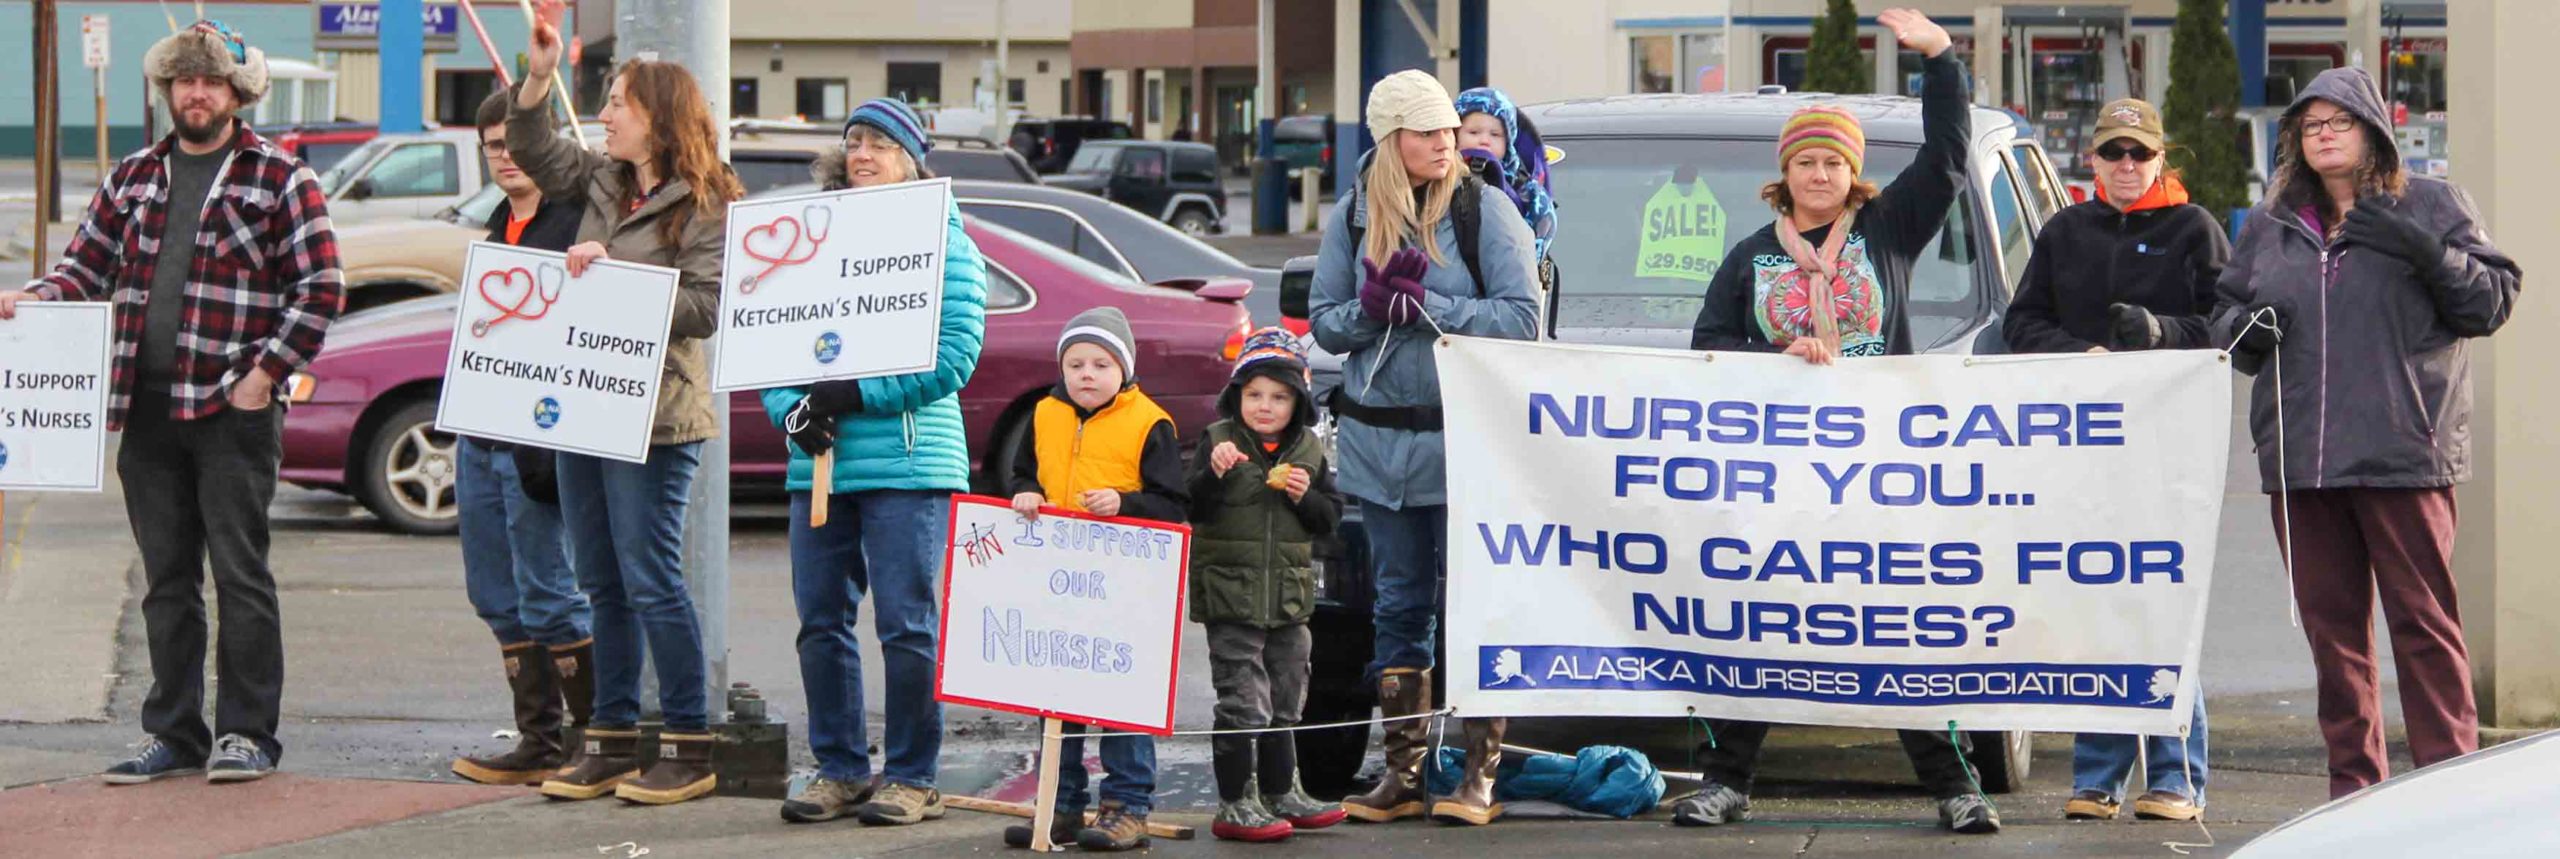 supporting nurses with written banners and signs